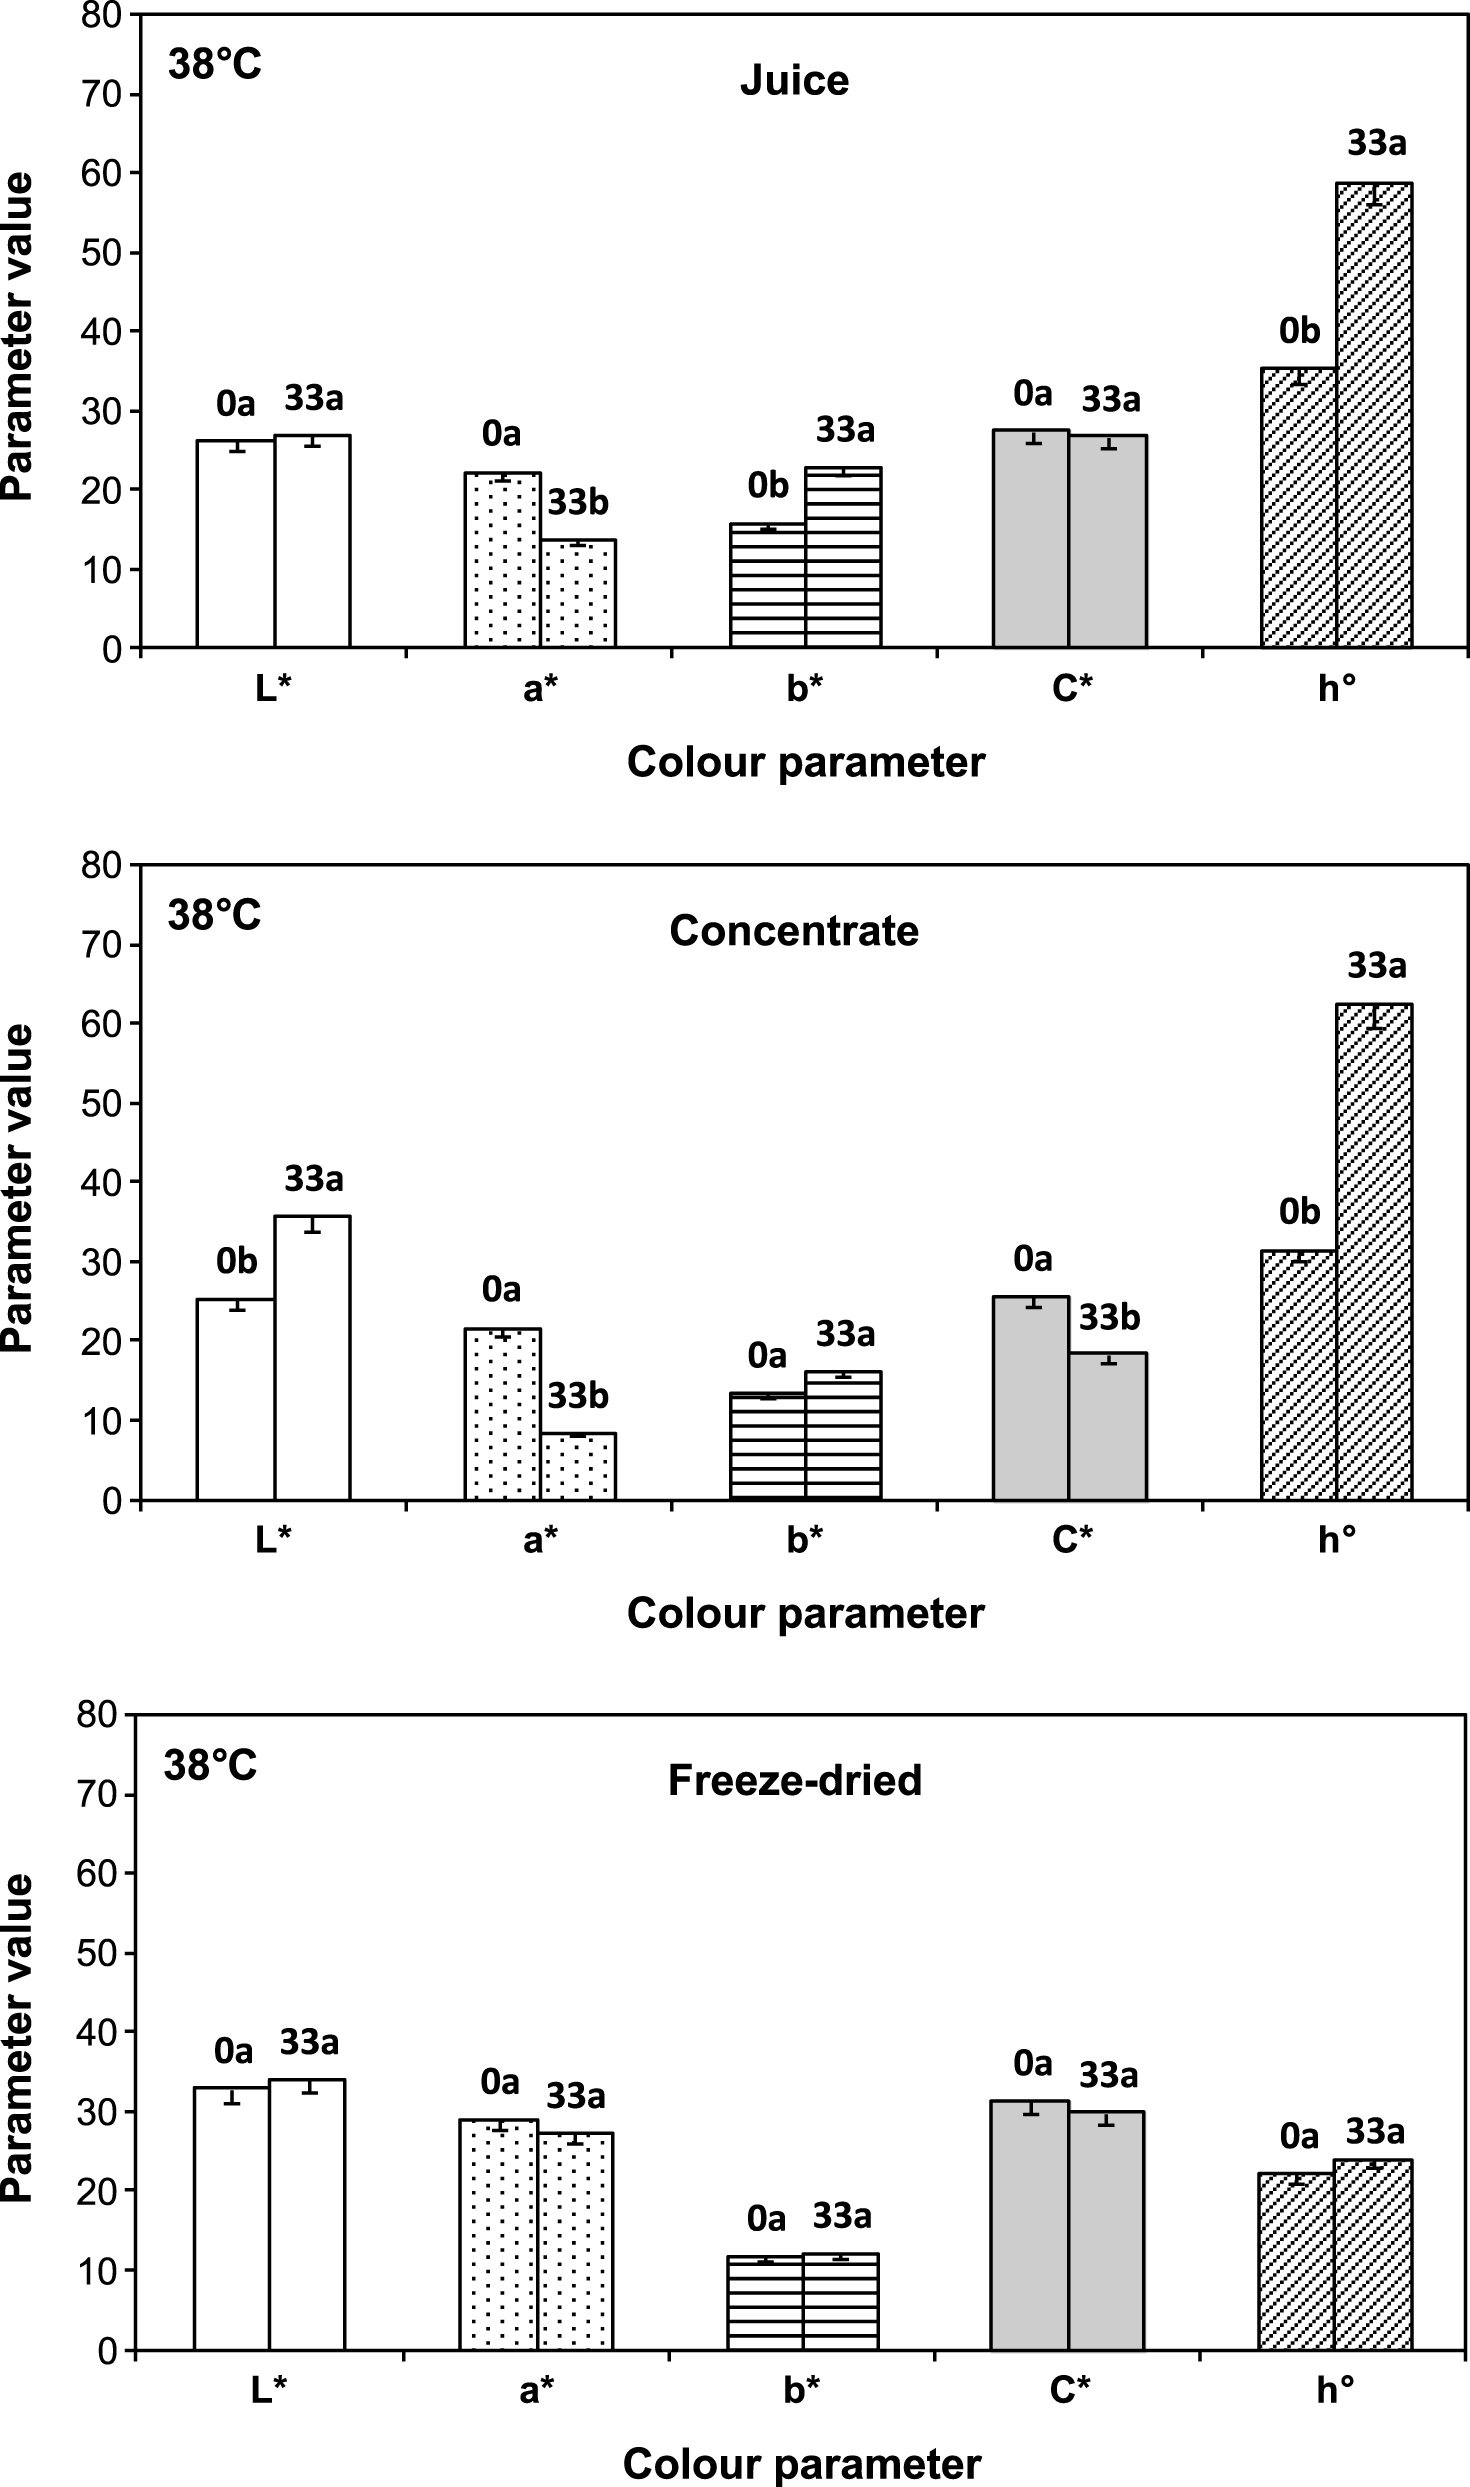 Comparison of all colour parameters (L*, a*, b*, C*, h°) in freeze dried encapsulated, concentrate (61 °Bx) and fresh (18.7 °Bx) cherry juice at 0 and 33 days stored at 38°C. Different letters above the data bars indicate that colour parameter differed between storage time, P <  0.05, Student-Newman-Keuls test.